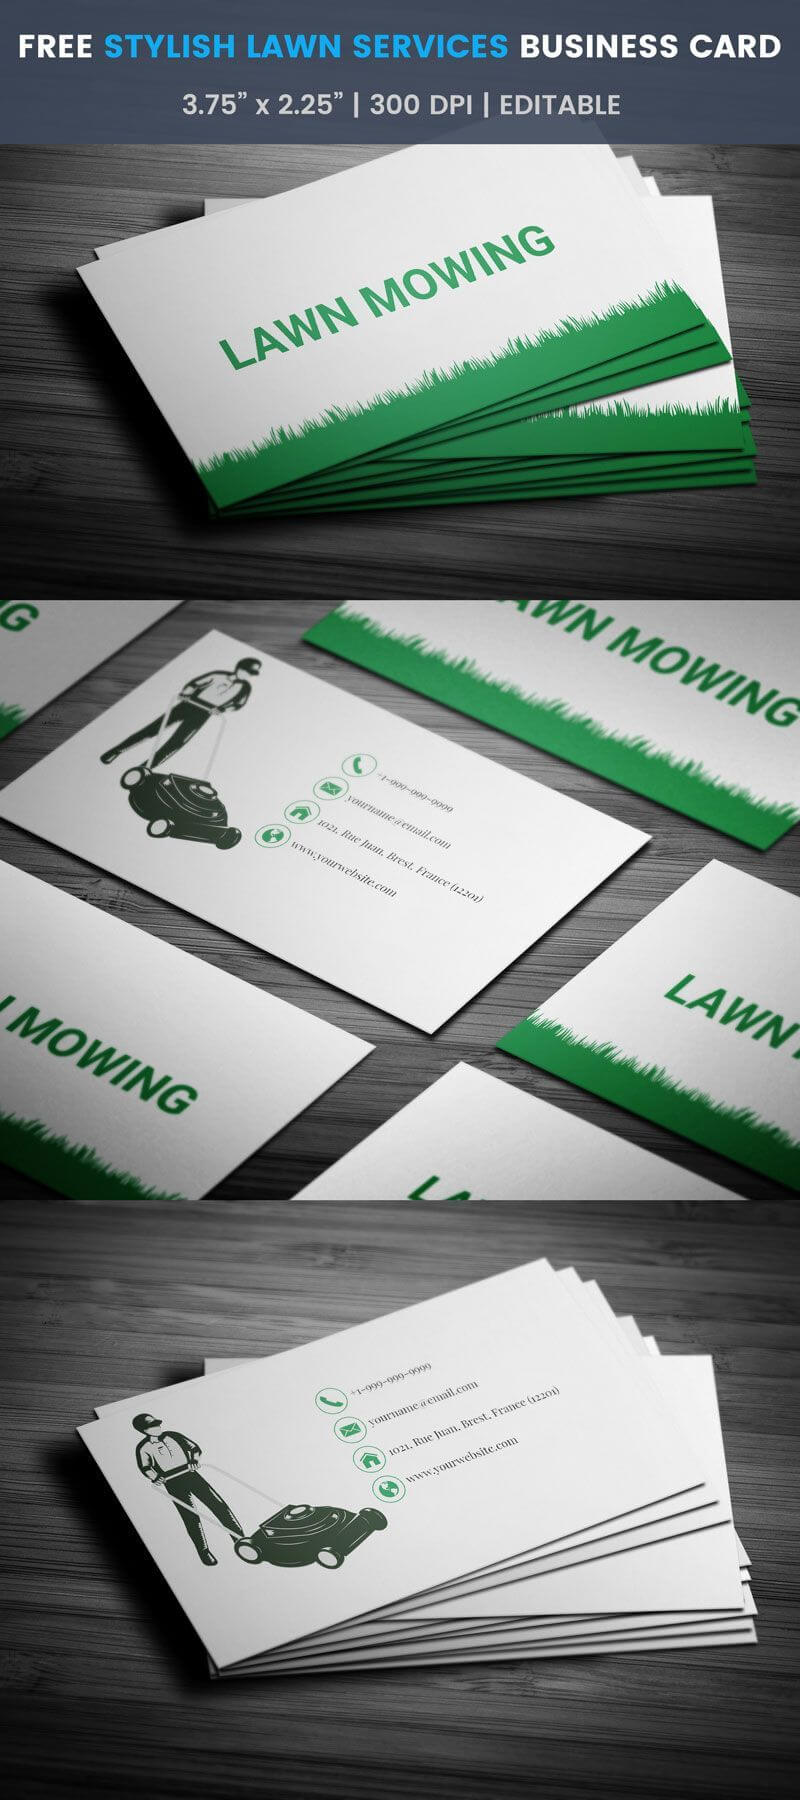 Brilliant Lawn Mowing Business Card  Full Preview | Lawn Pertaining To Lawn Care Business Cards Templates Free